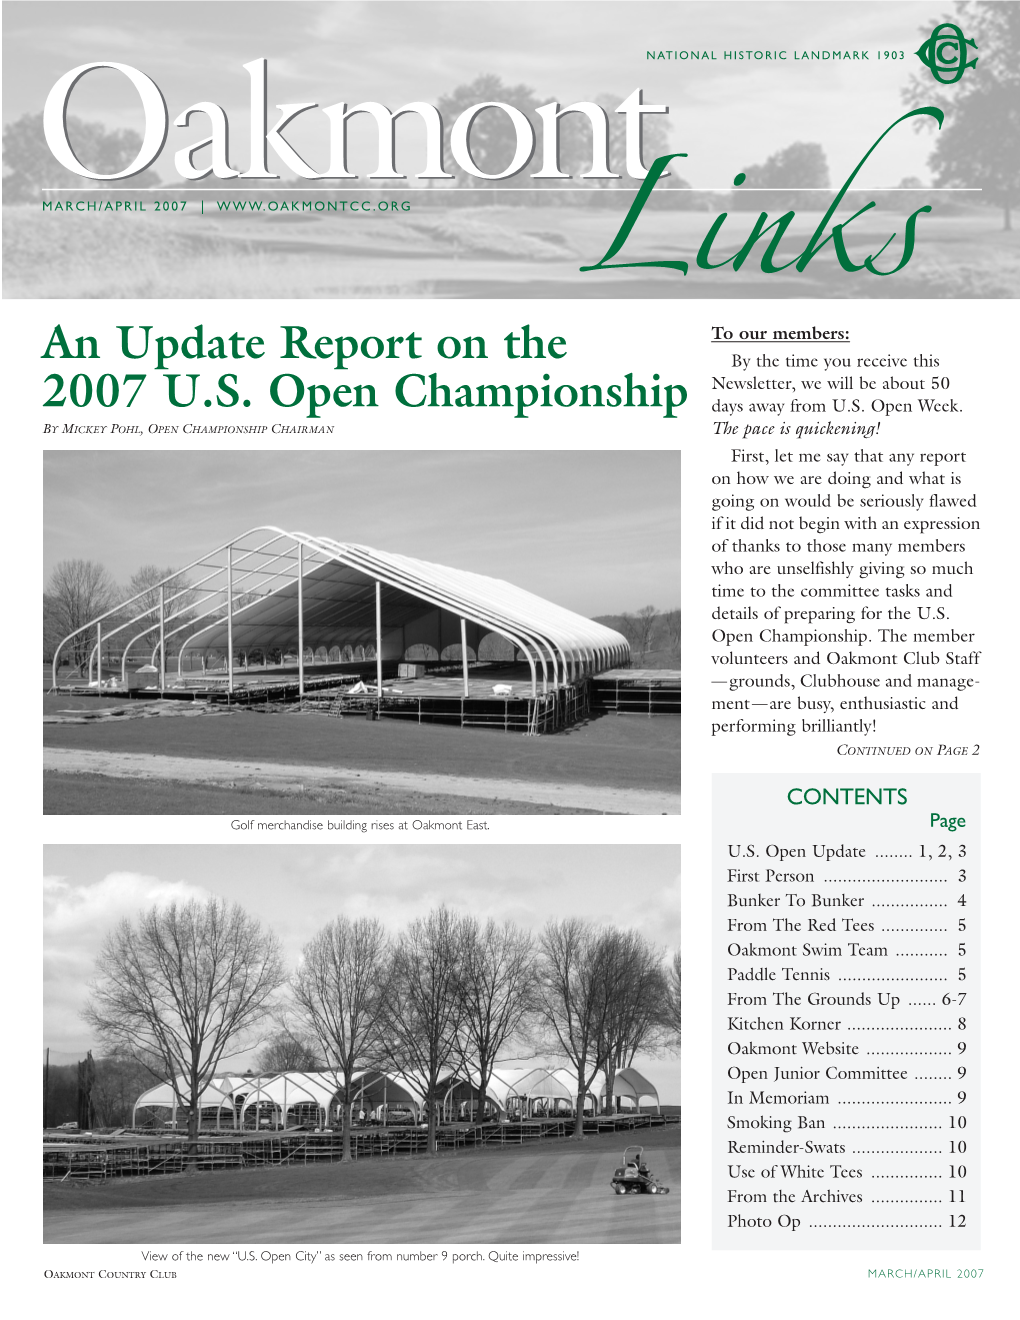 An Update Report on the 2007 U.S. Open Championship